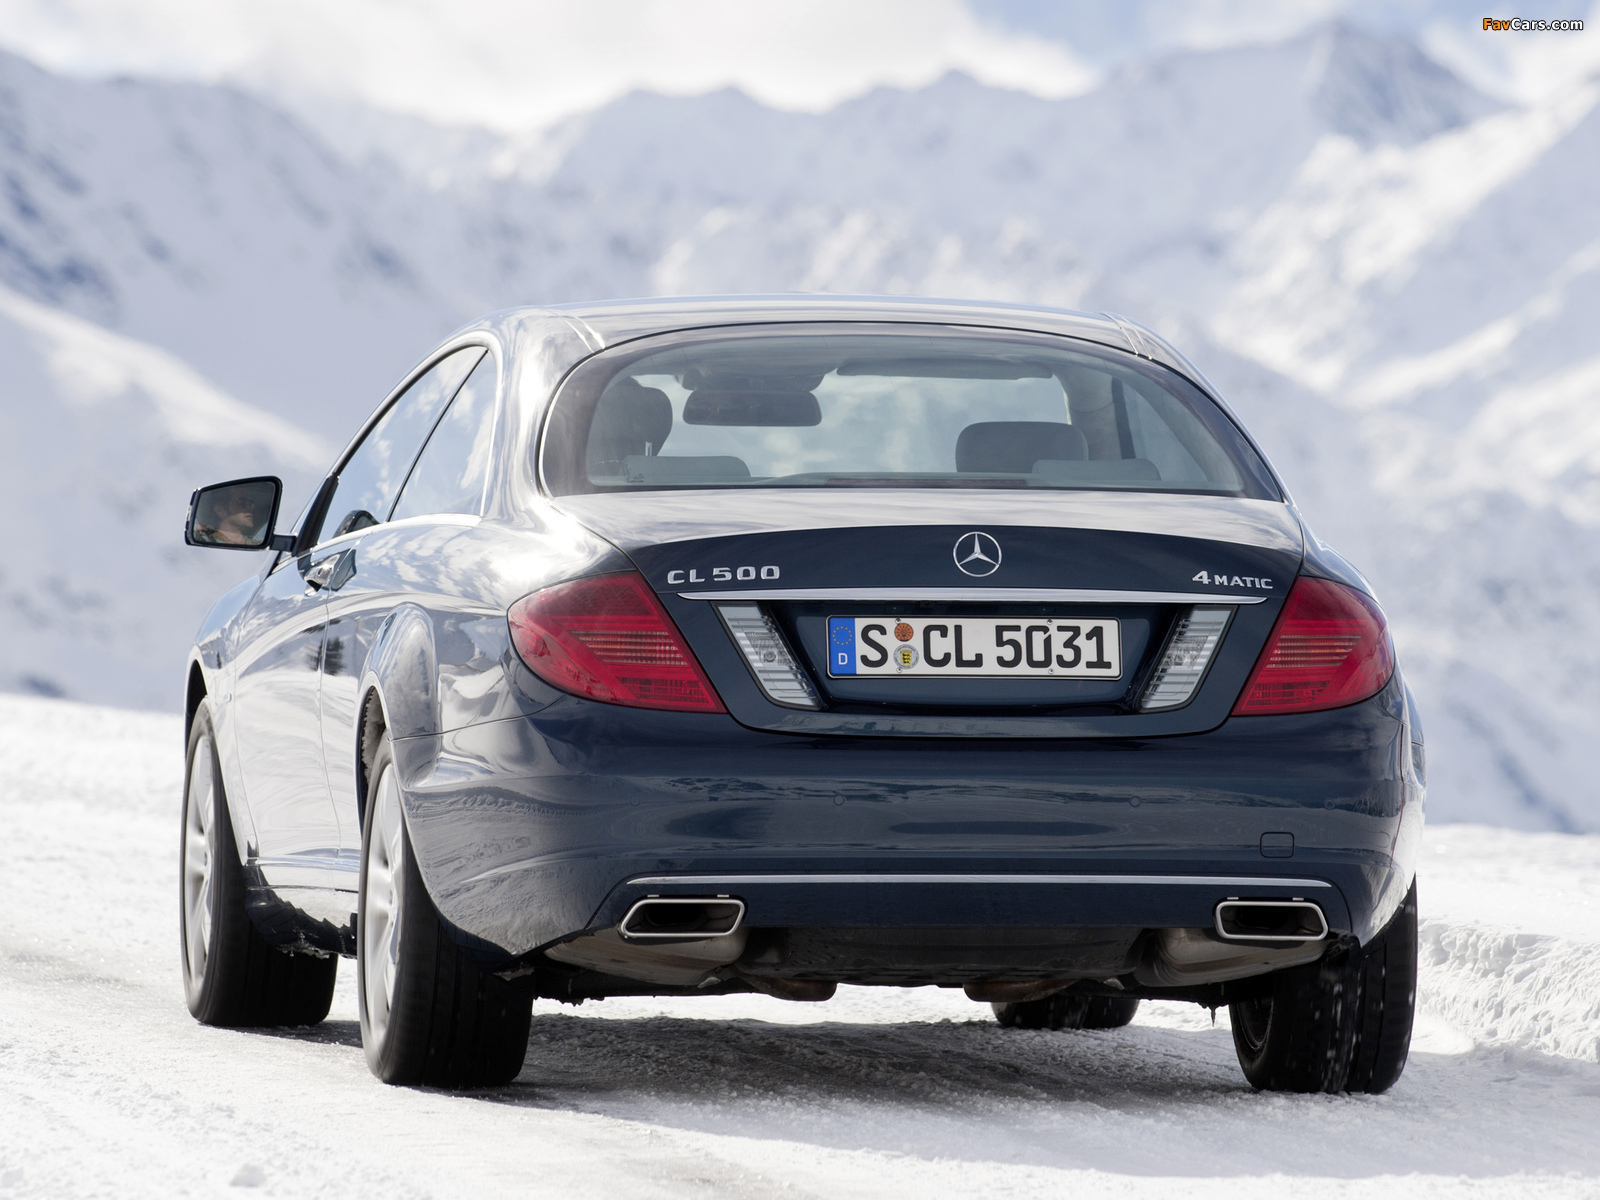 Mercedes-Benz CL 500 4MATIC (S216) 2010 pictures (1600 x 1200)